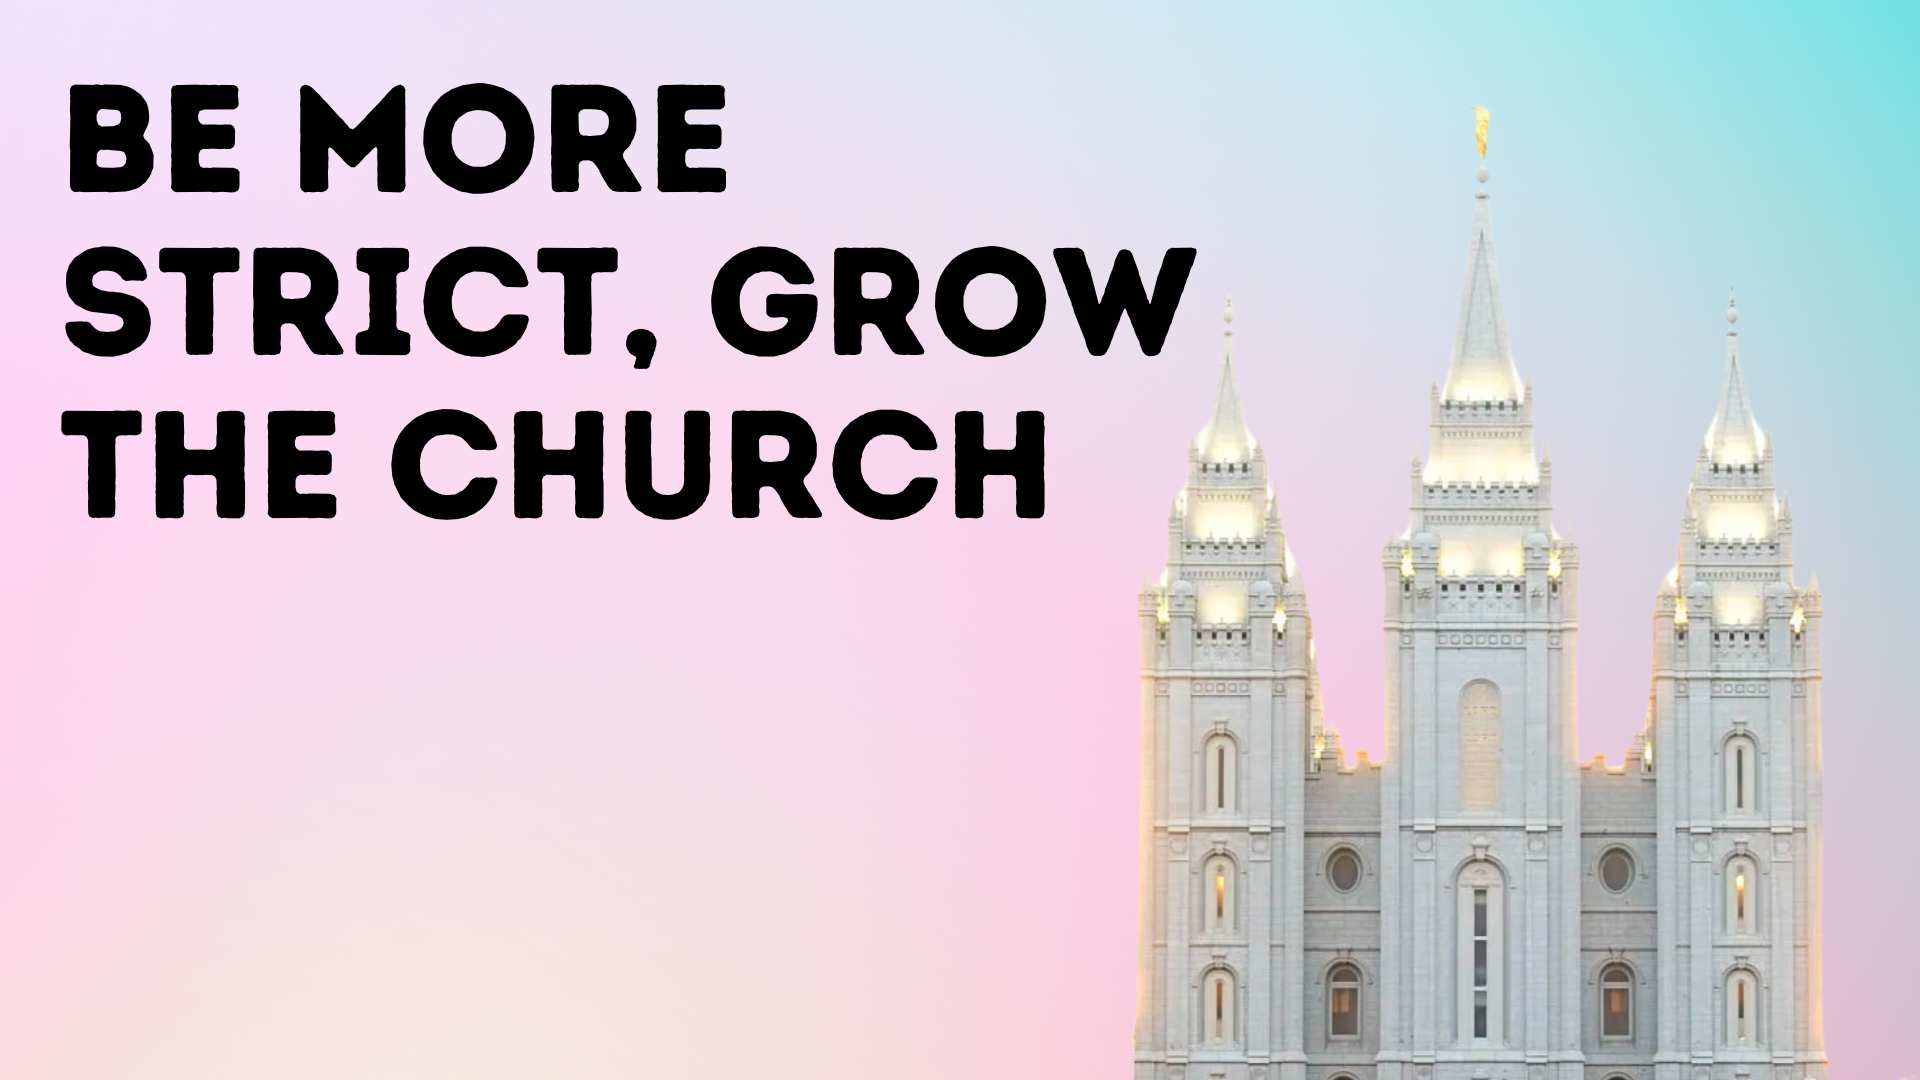 Be More Strict, Grow the Church